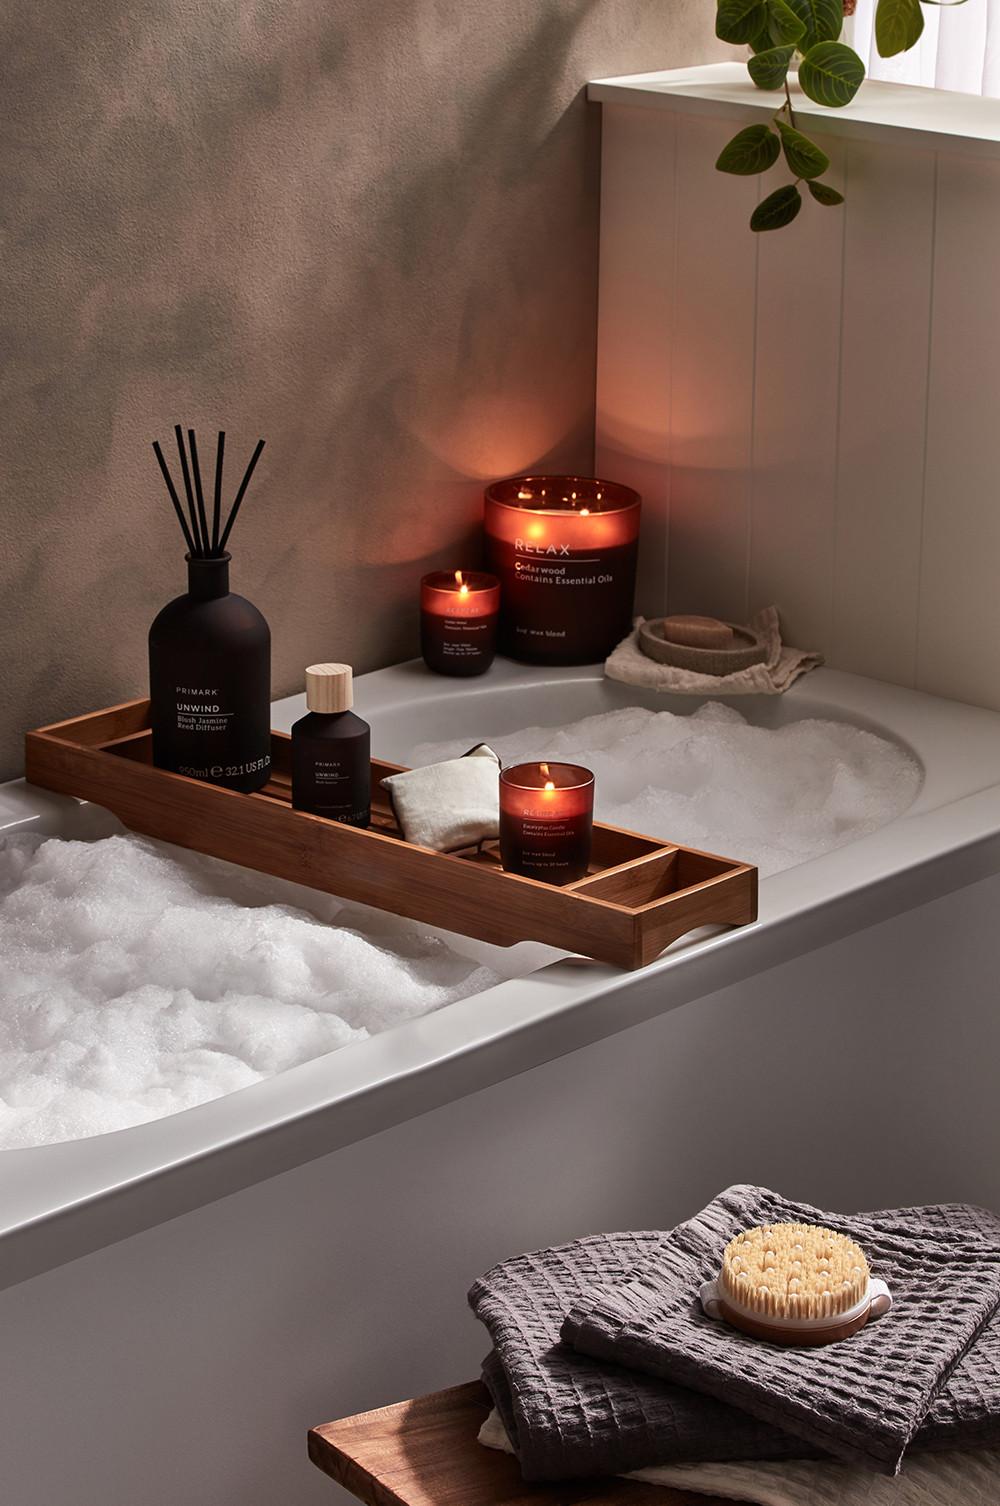 Bathroom set up, with candles, wooden bath shelf and body brush